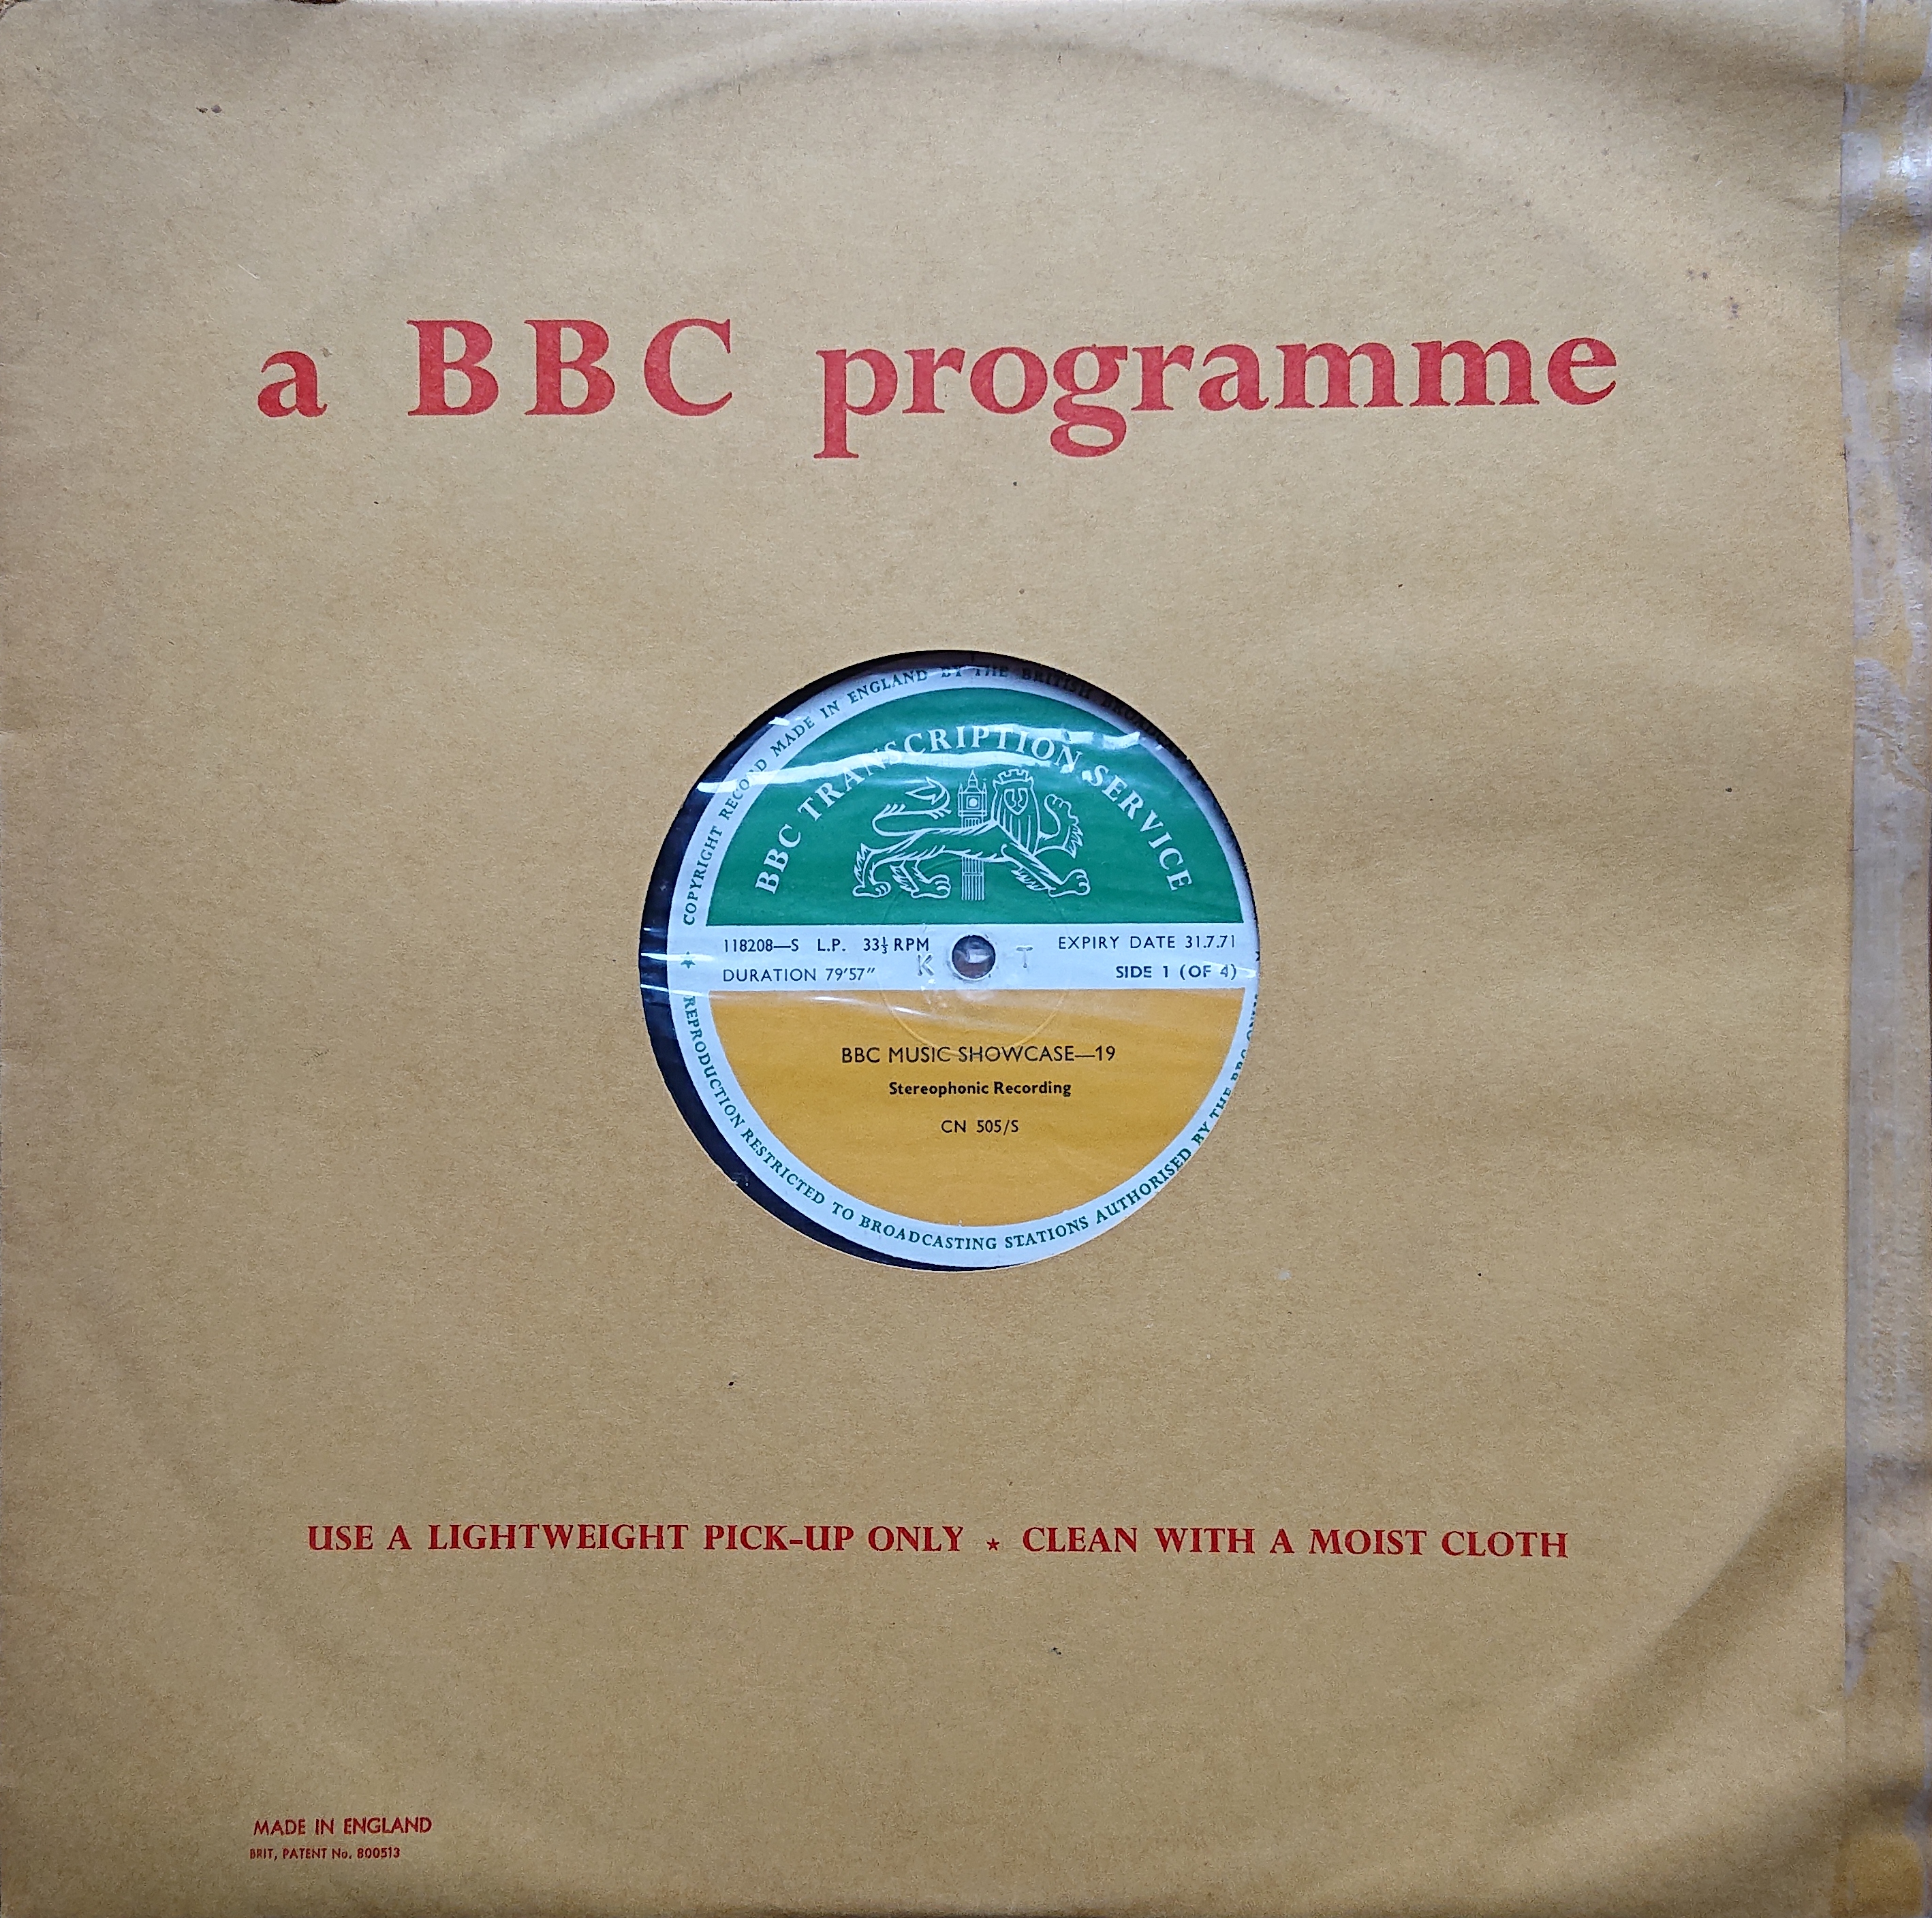 Picture of CN 505 S 37 BBC music showcase - 19 (Sides 1 & 3) by artist Various from the BBC albums - Records and Tapes library